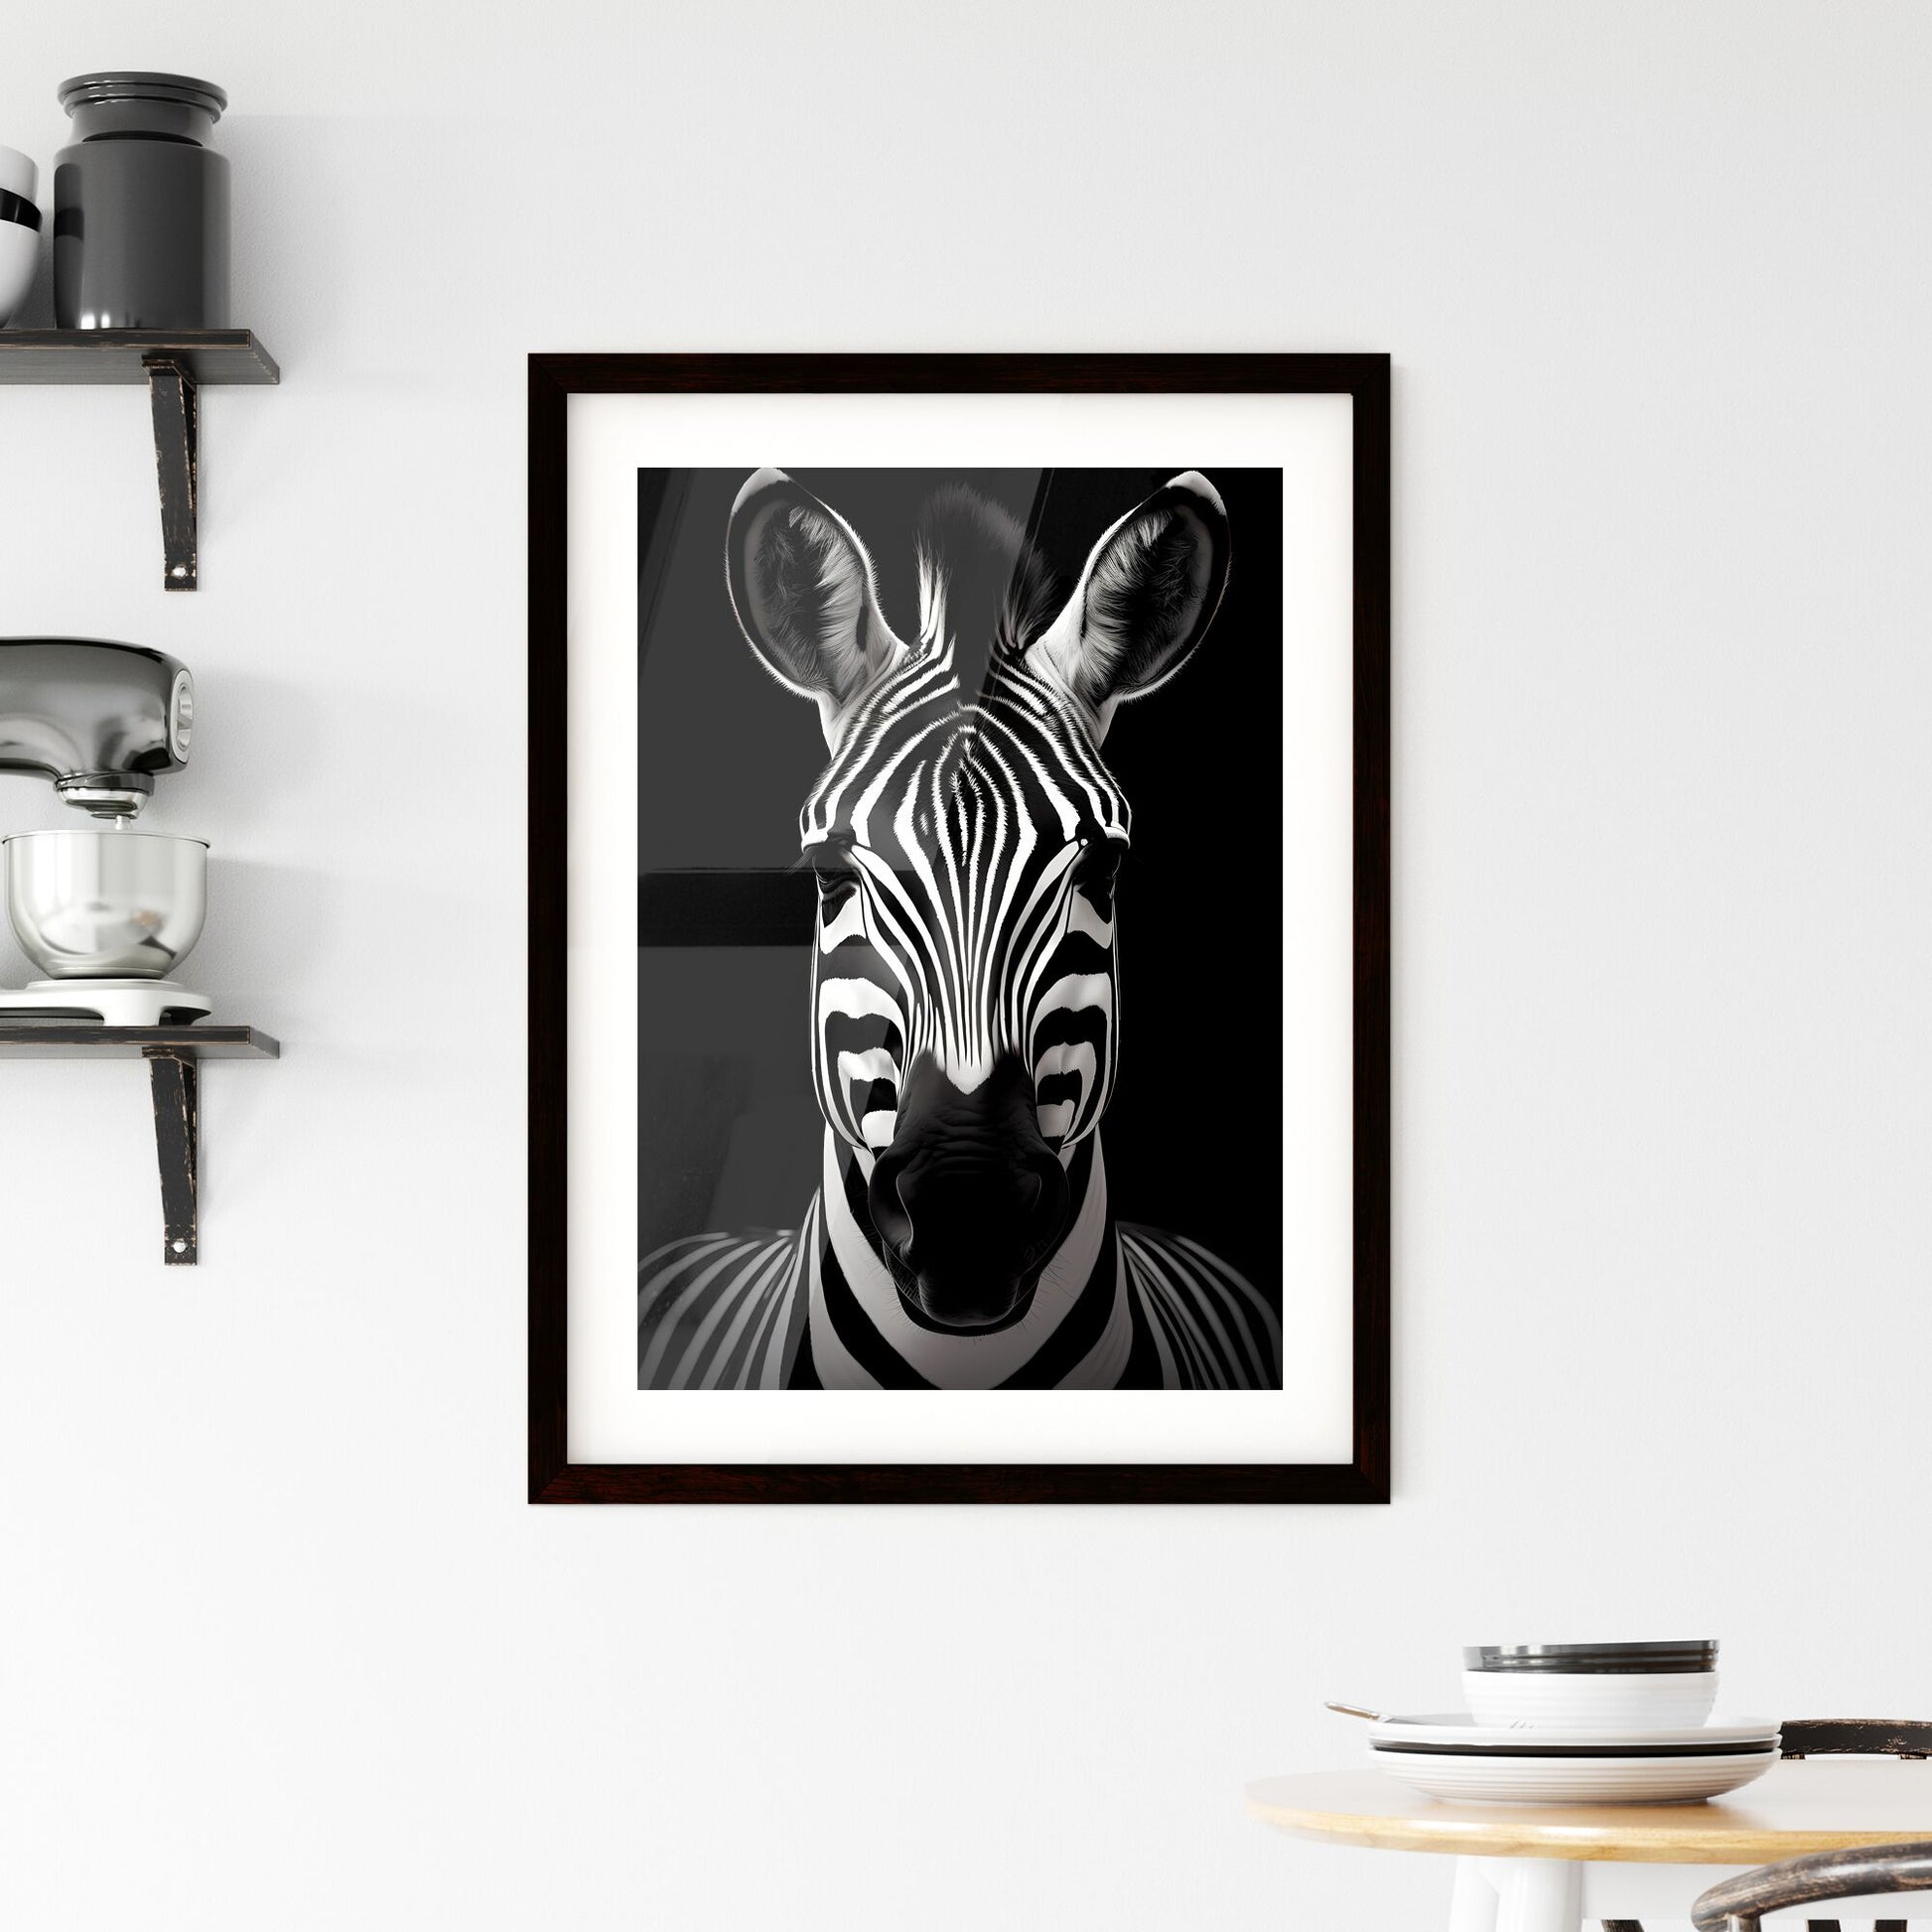 A Poster of A black and white zebra - A Close Up Of A Zebra Default Title